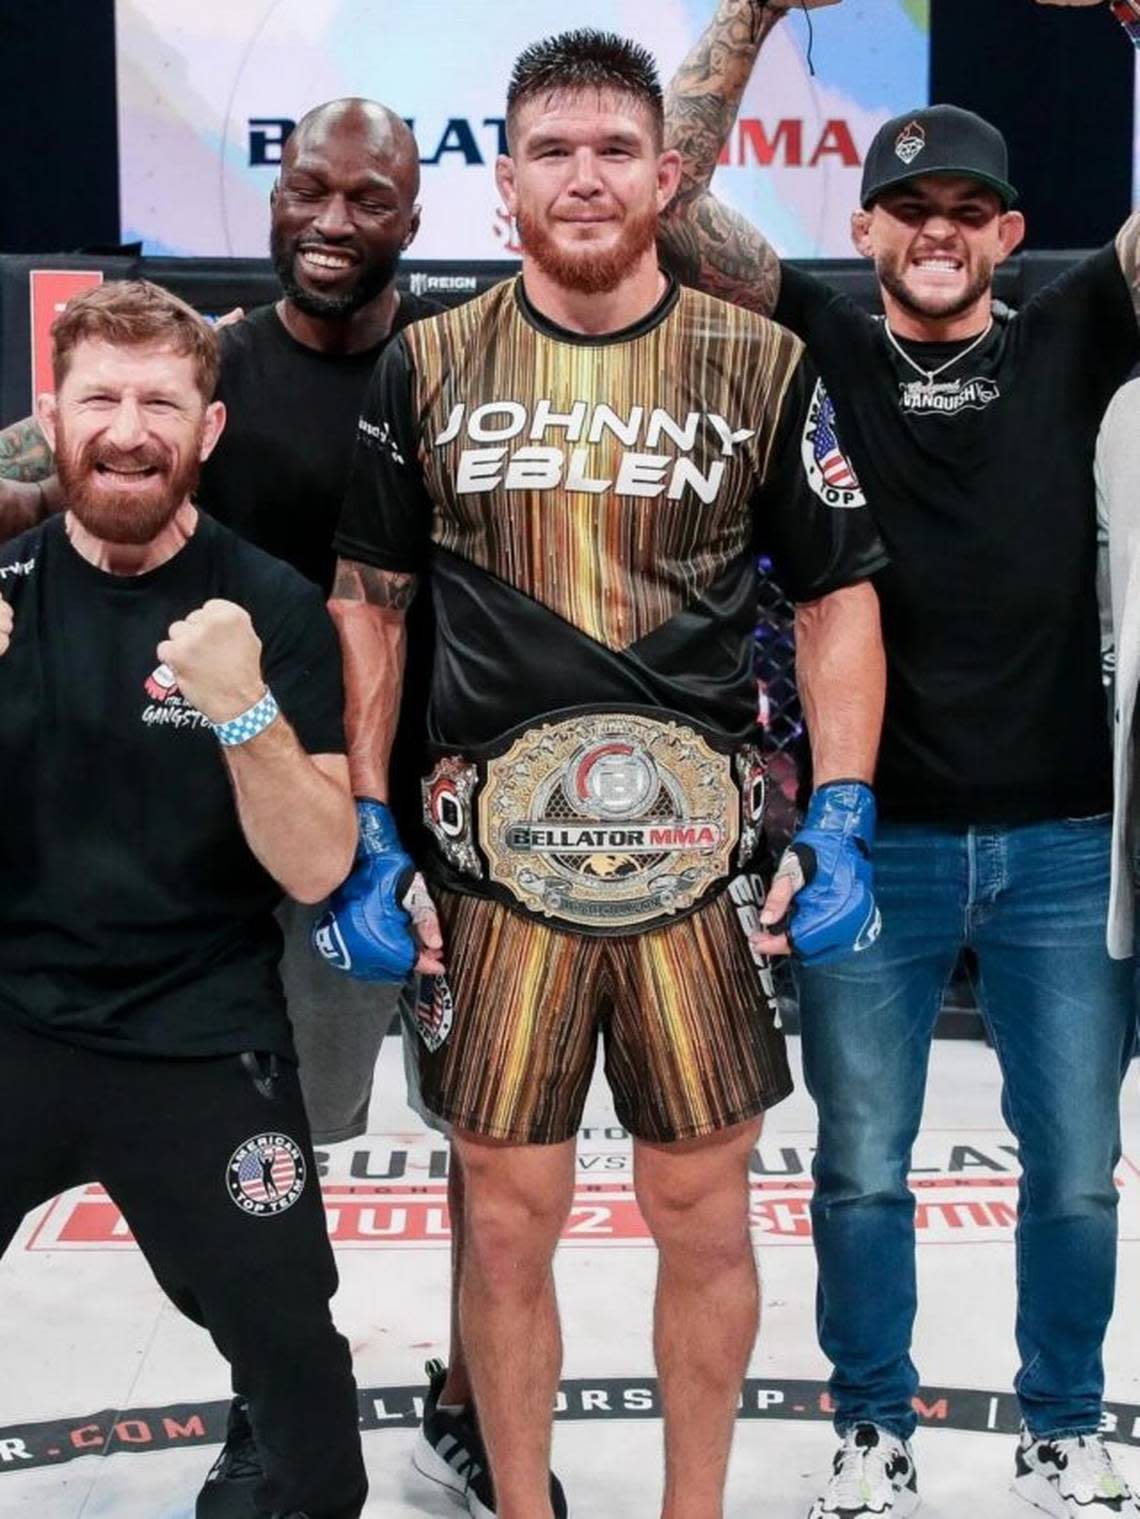 New Bellator MMA middleweight champ Johnny Eblen of American Top Team after winning the title at Bellator 282.